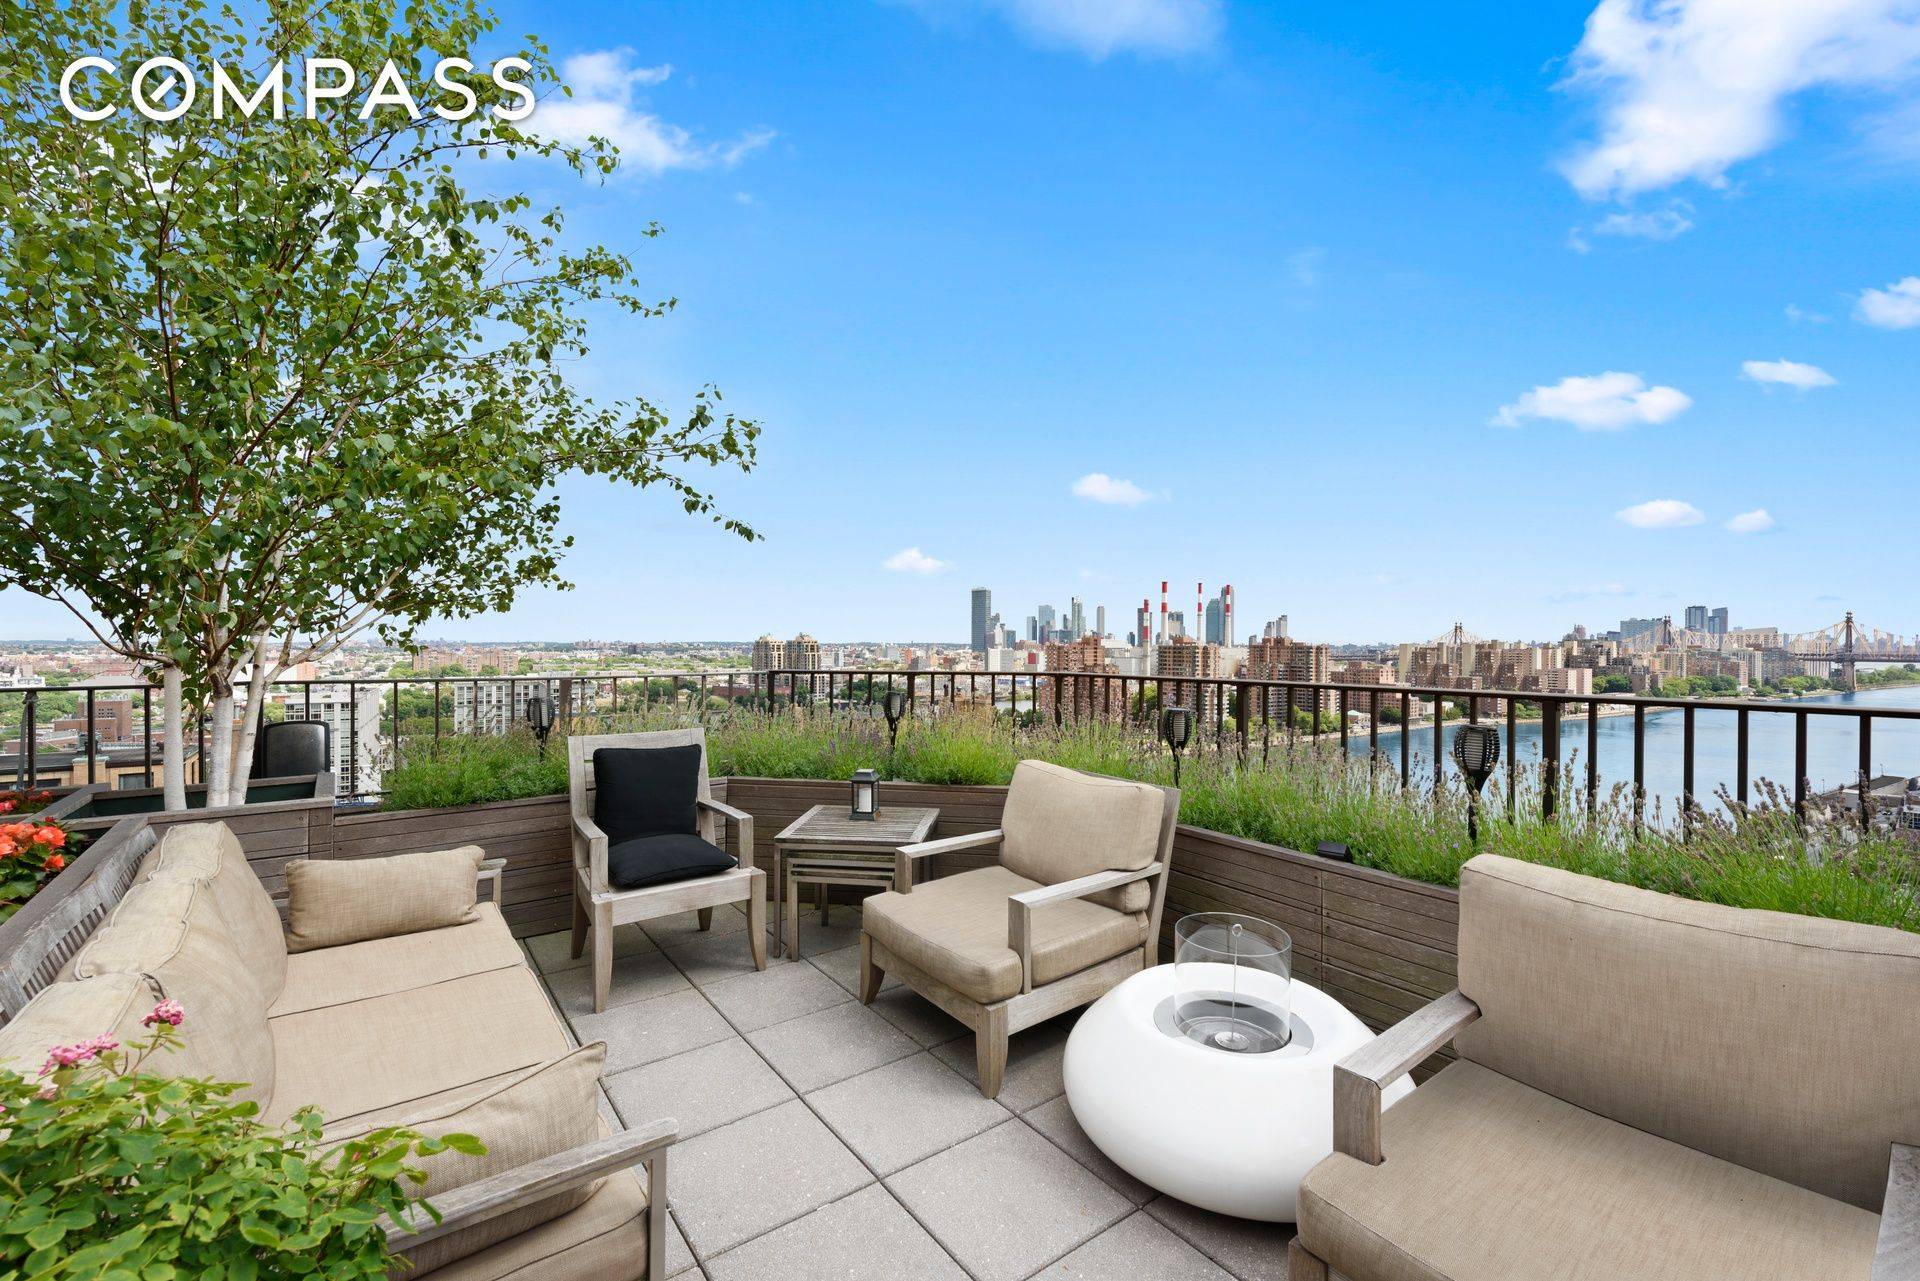 MAGICAL EAST RIVER PENTHOUSE WITH VIEWS FOR MILES Make shimmering East River and skyline views your daily backdrop in this extraordinary four bedroom, three and a half bathroom penthouse duplex ...